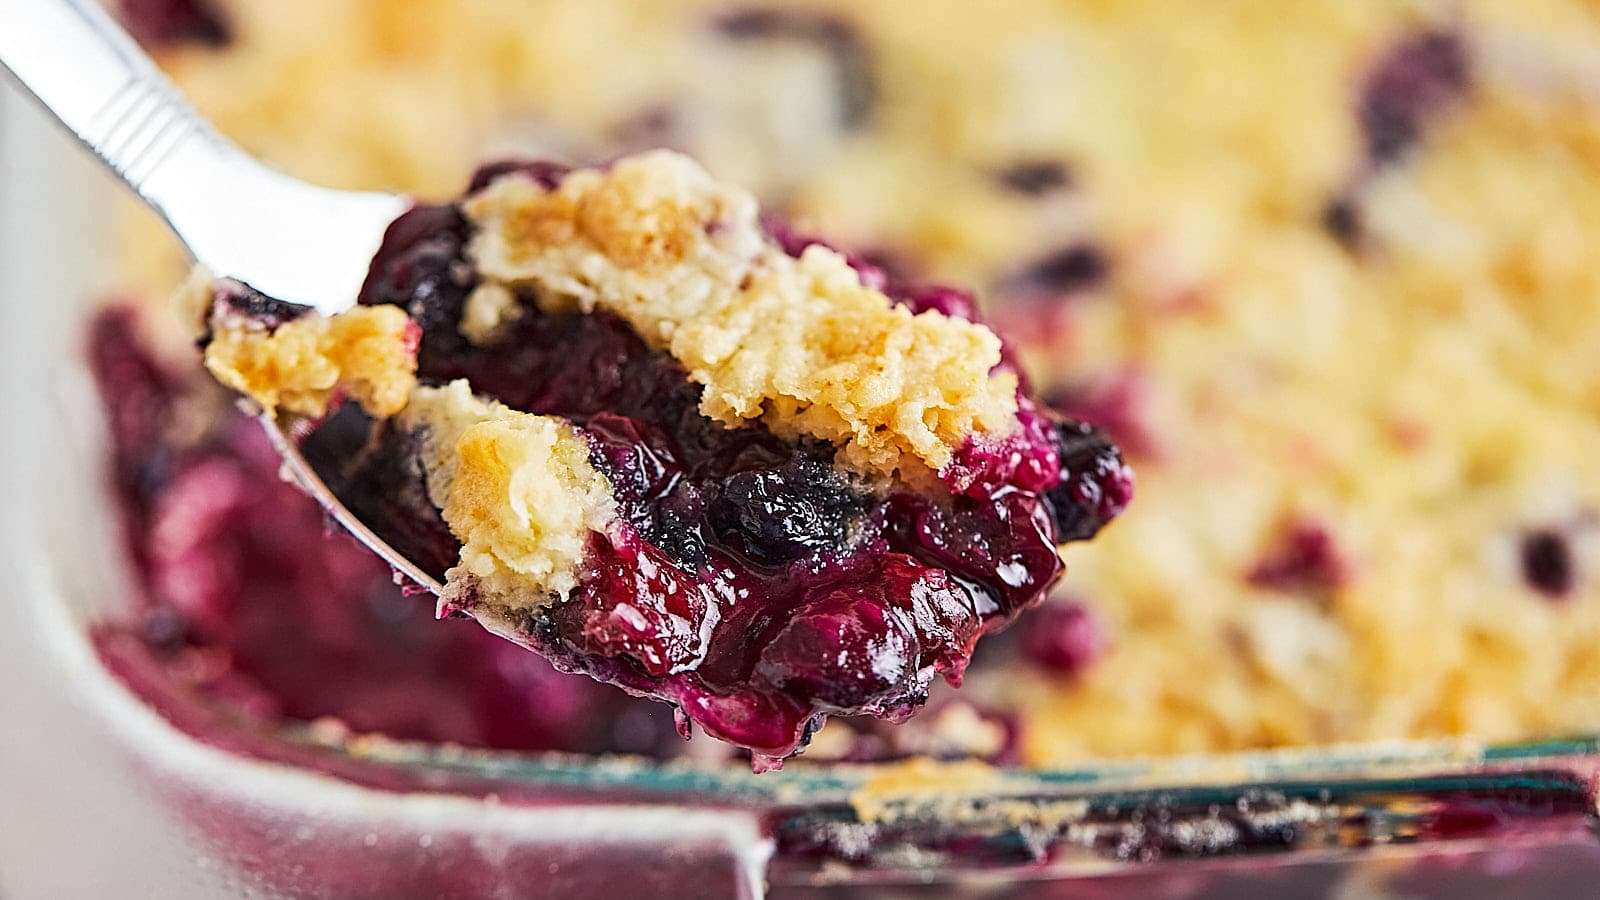 Blueberry Dump Cake recipe by Cheerful Cook.